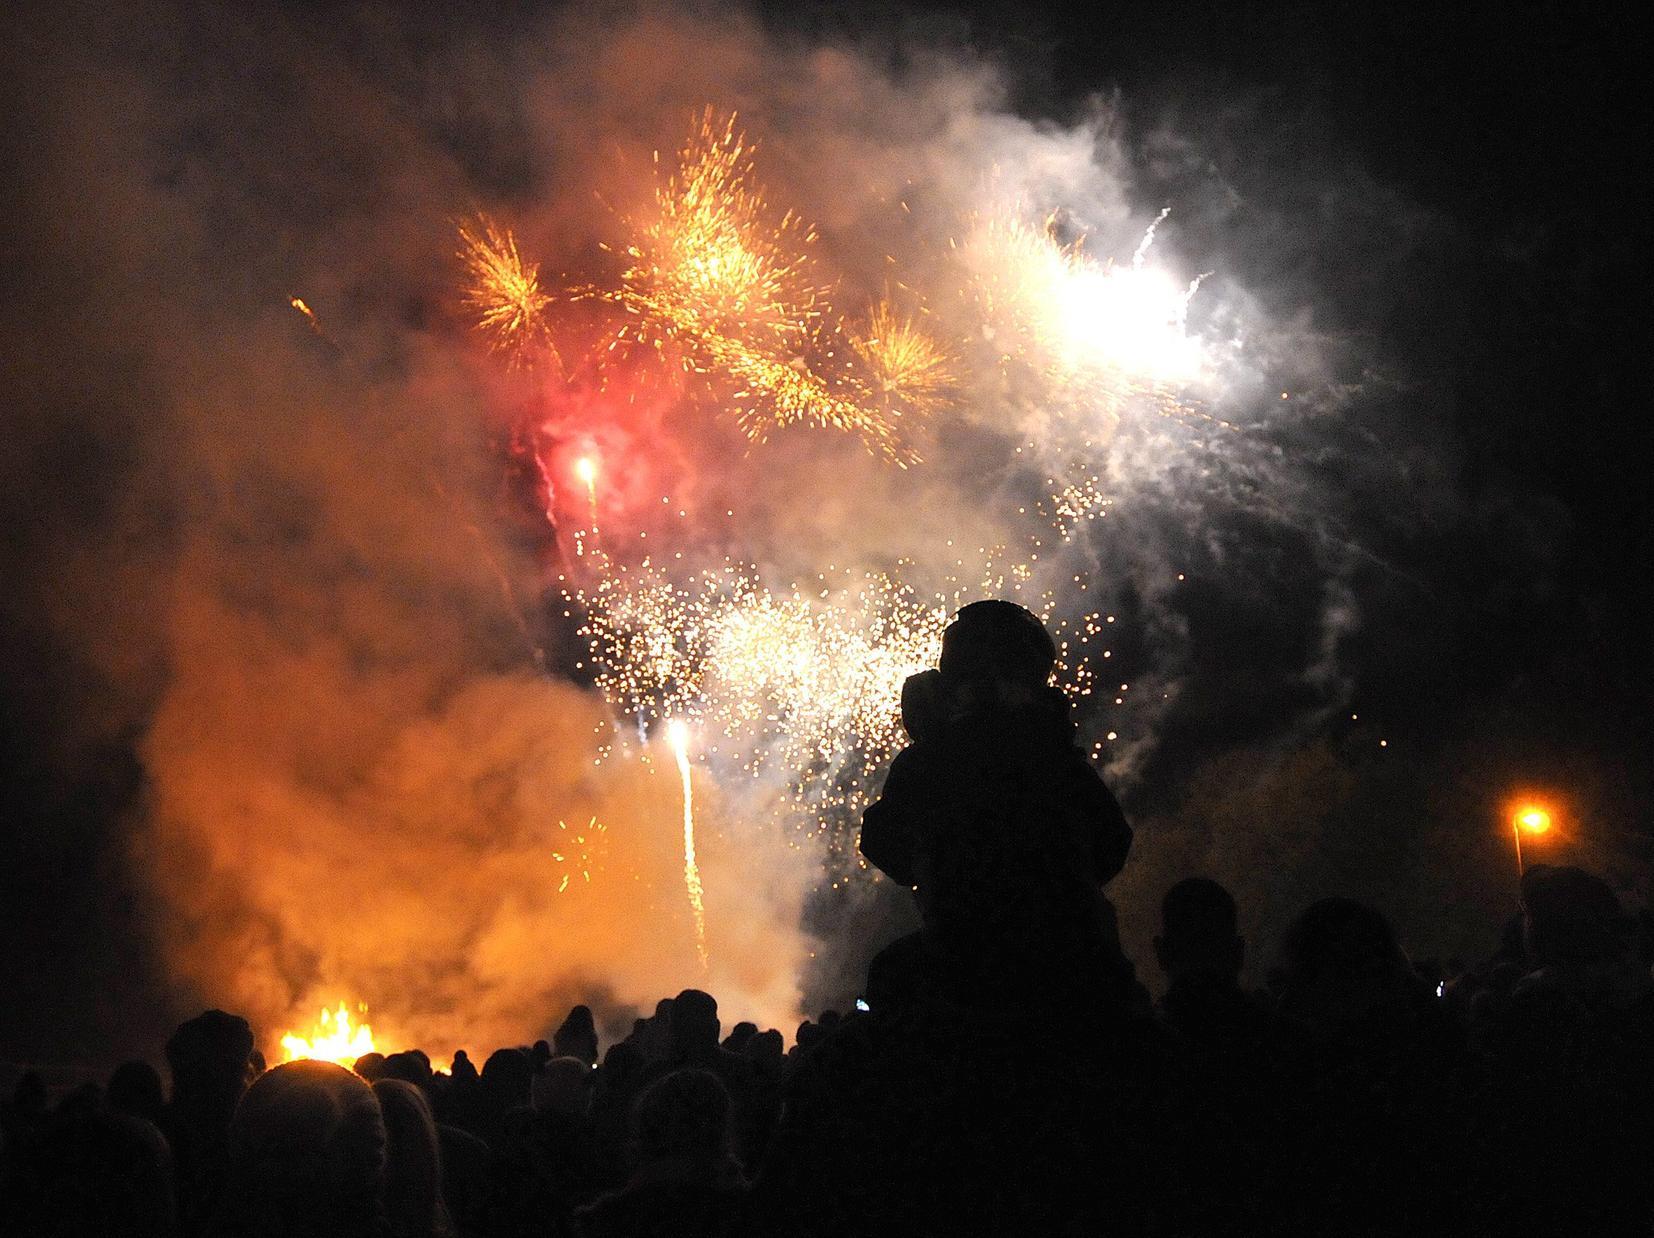 Brilliant Bonfire Night at Humble Bee Farm runs from 5.30pm to 7.30pm. Tickets must be booked ahead - contact the farm.